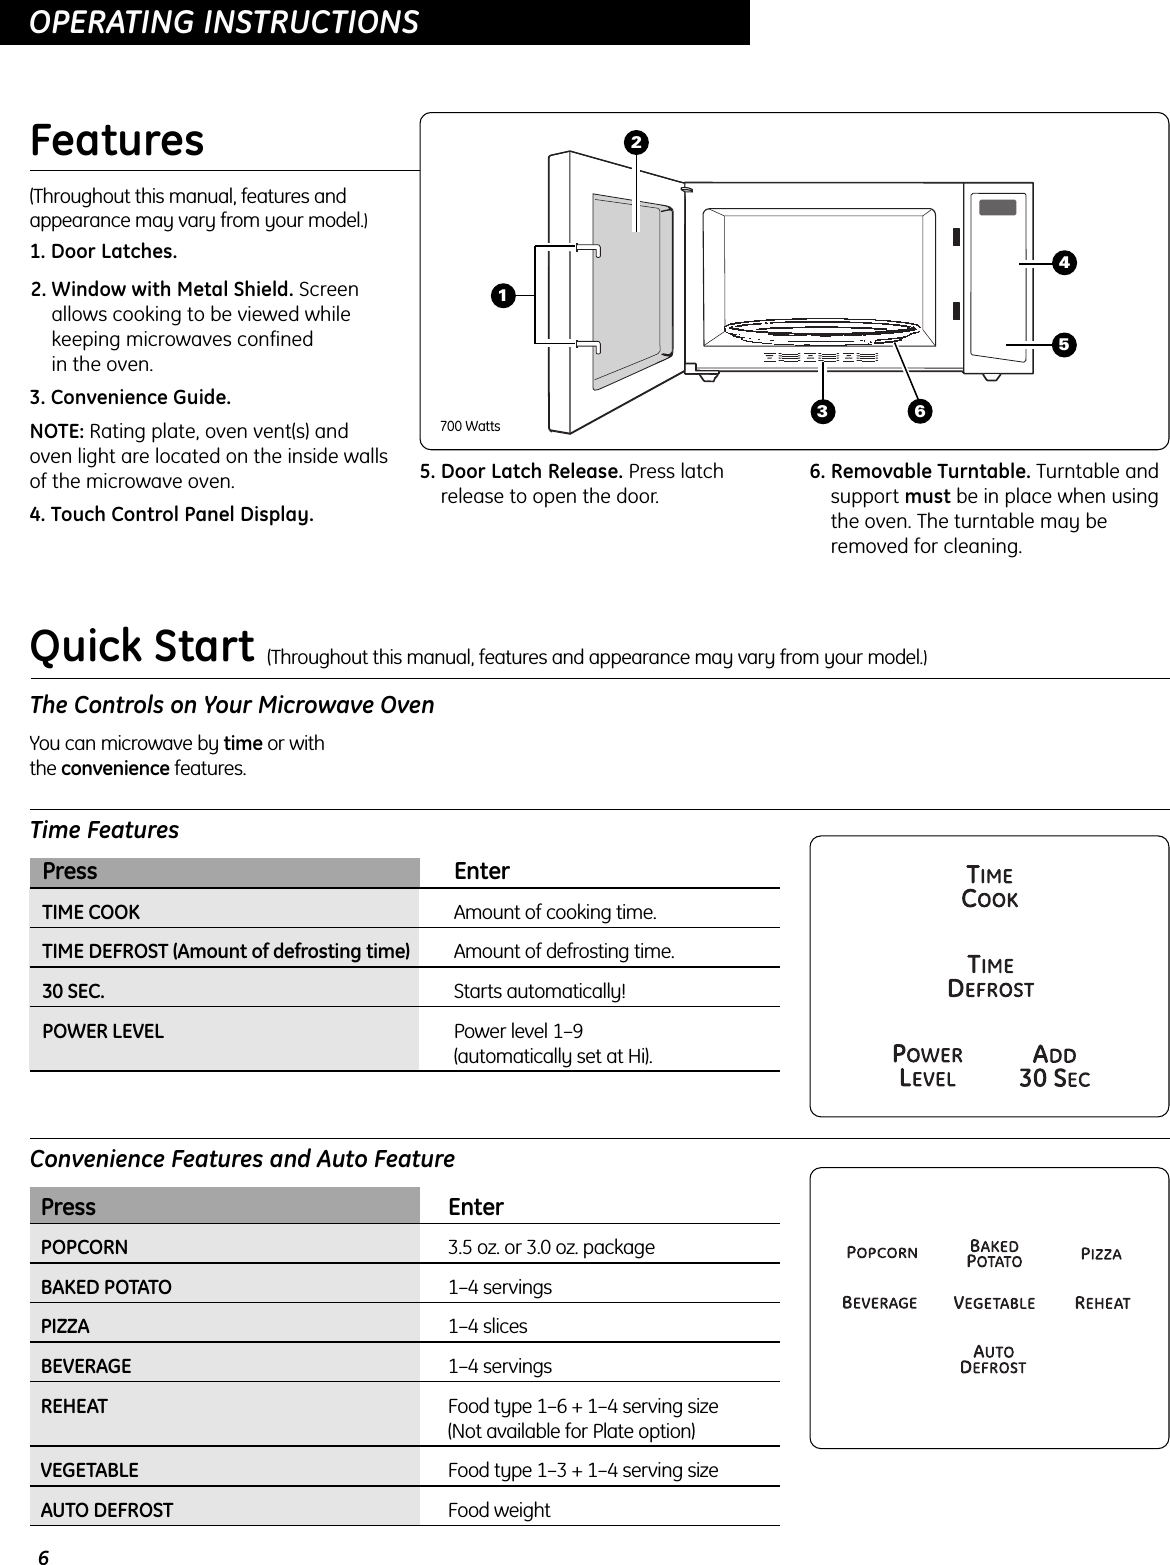 6OPERATING INSTRUCTIONSFeatures(Throughout this manual, features andappearance may vary from your model.)1. Door Latches. 2. Window with Metal Shield. Screenallows cooking to be viewed whilekeeping microwaves confined in the oven.3. Convenience Guide.NOTE: Rating plate, oven vent(s) andoven light are located on the inside wallsof the microwave oven.4. Touch Control Panel Display.5. Door Latch Release. Press latchrelease to open the door. 6. Removable Turntable. Turntable andsupport must be in place when usingthe oven. The turntable may beremoved for cleaning. 13Press EnterTIME COOK Amount of cooking time.TIME DEFROST (Amount of defrosting time) Amount of defrosting time.30 SEC. Starts automatically!POWER LEVEL Power level 1–9 (automatically set at Hi).Time FeaturesQuick Start (Throughout this manual, features and appearance may vary from your model.)The Controls on Your Microwave OvenYou can microwave by time or with the convenience features.Convenience Features and Auto Feature524Press EnterPOPCORN 3.5 oz. or 3.0 oz. packageBAKED POTATO 1–4 servingsPIZZA 1–4 slicesBEVERAGE 1–4 servingsREHEAT Food type 1–6 + 1–4 serving size (Not available for Plate option)VEGETABLE Food type 1–3 + 1–4 serving sizeAUTO DEFROST Food weight6700 Watts